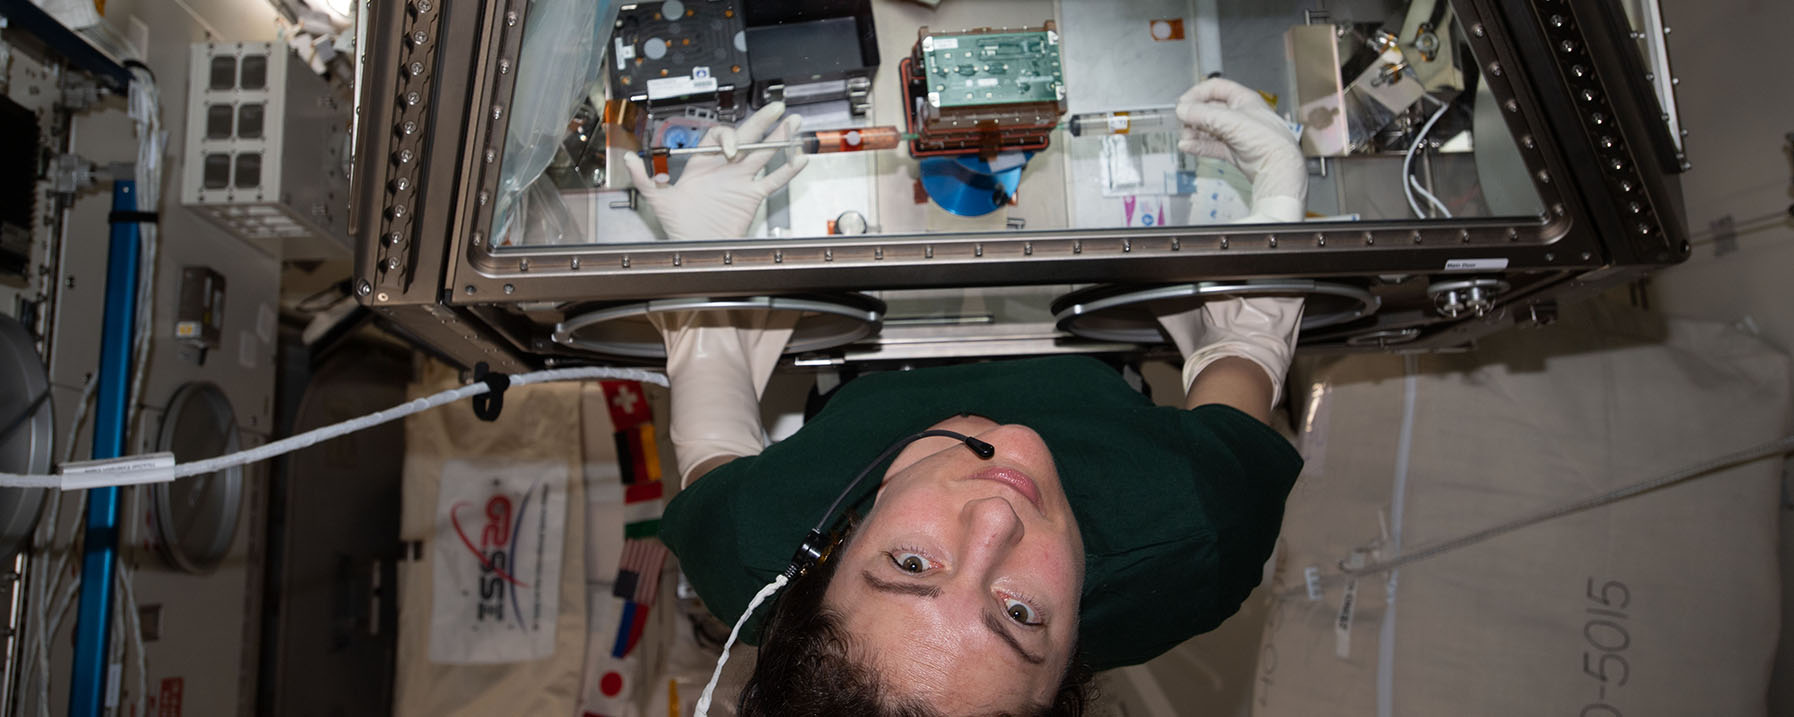 Astronaut doing experiment on space station